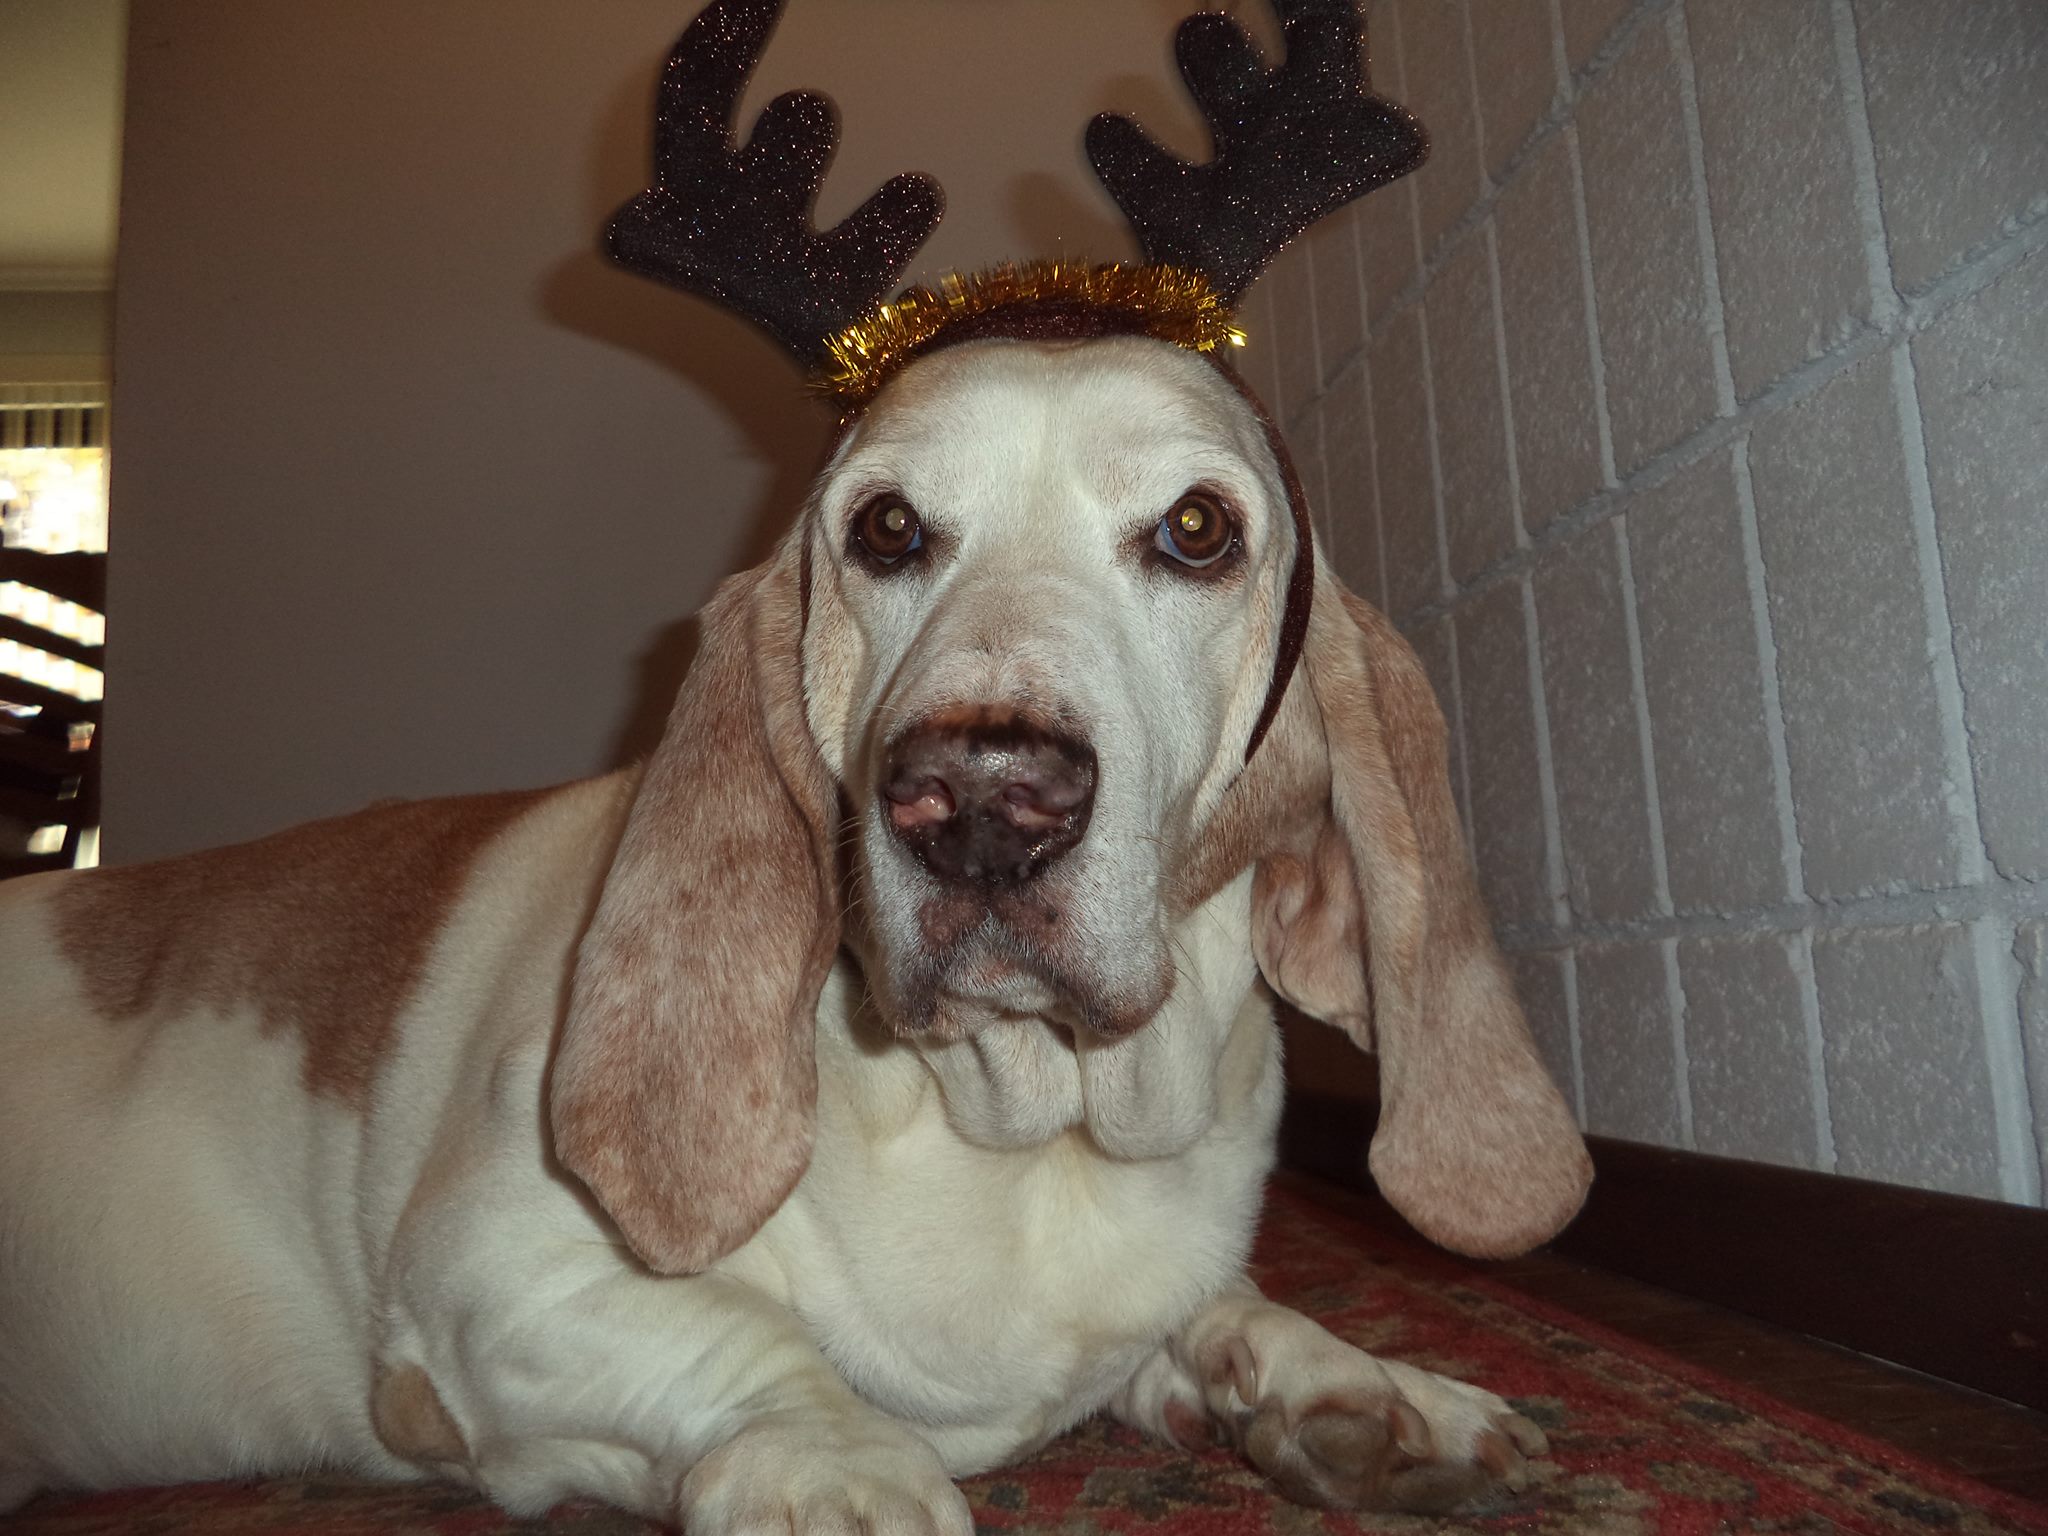 A Basset Hound lying on the floor while wearing a reindeer headpiece